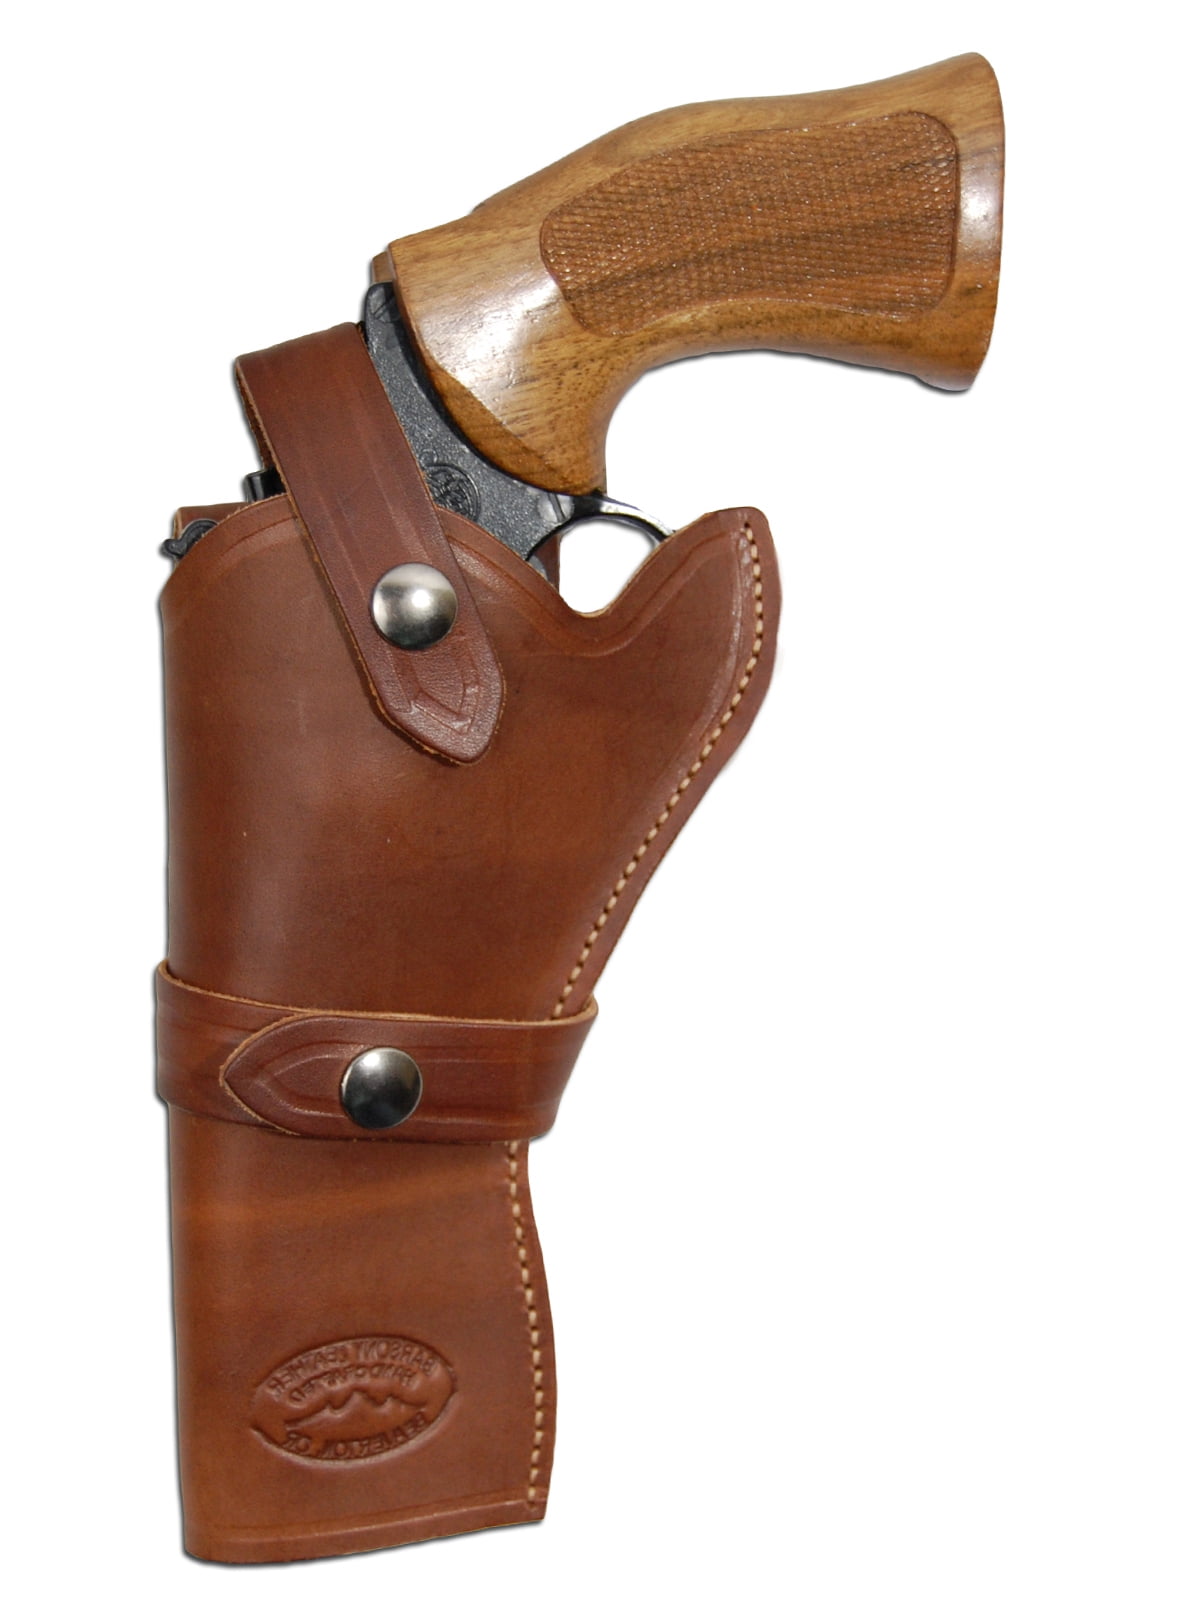 NEW Barsony Brown Leather Horizontal Gun Shoulder Holster for Ruger 4" Revolvers 